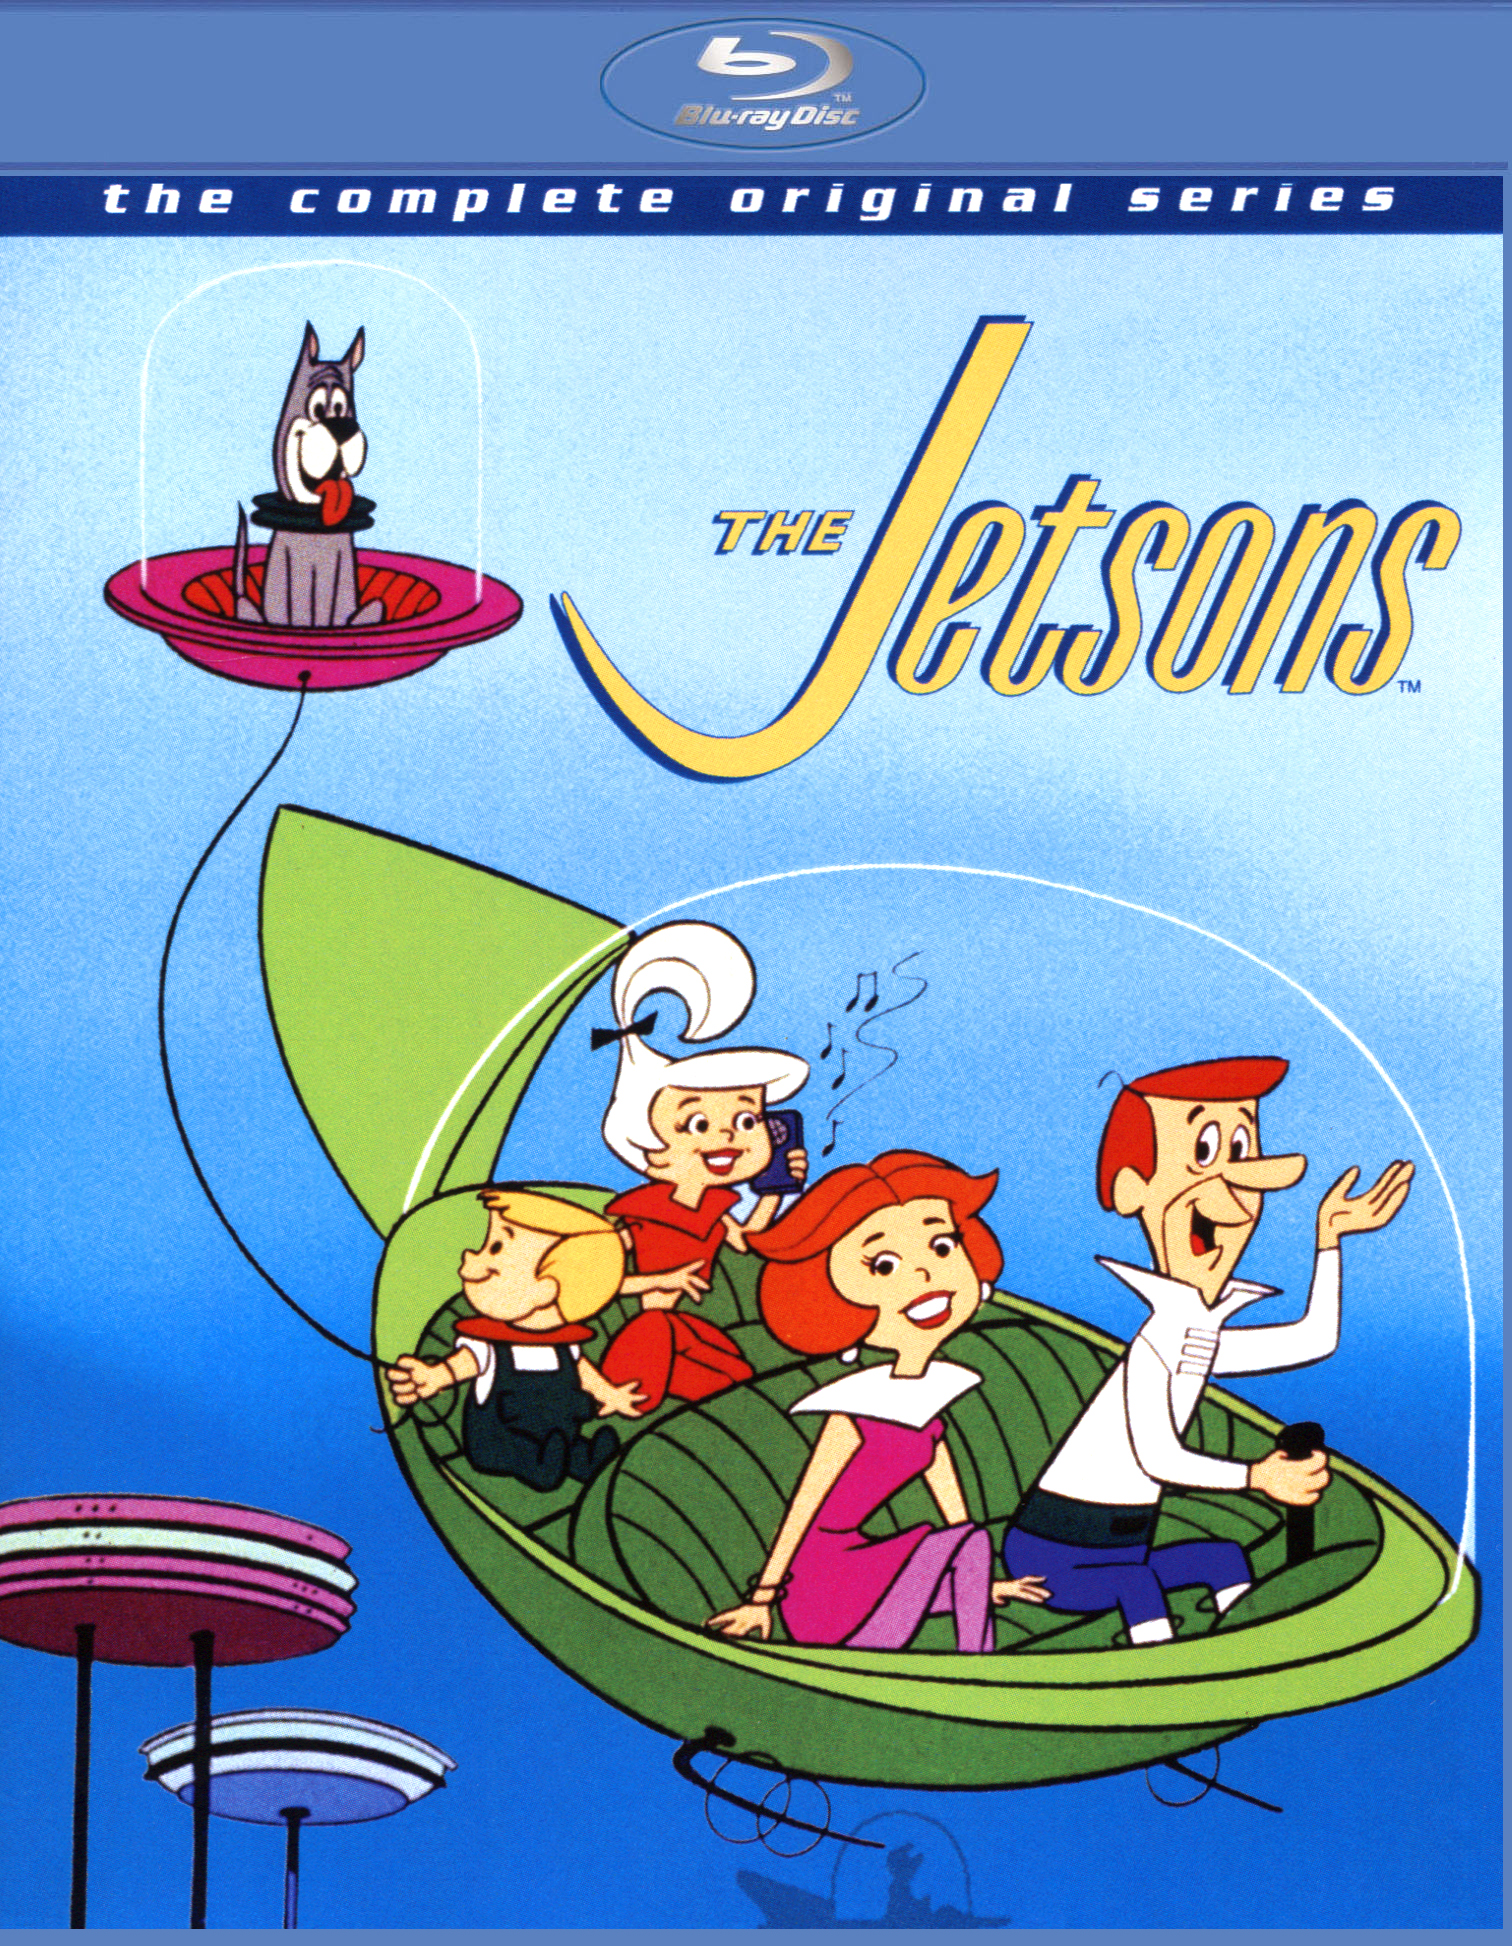 The Jetsons: The Complete Original Series [Blu-ray]